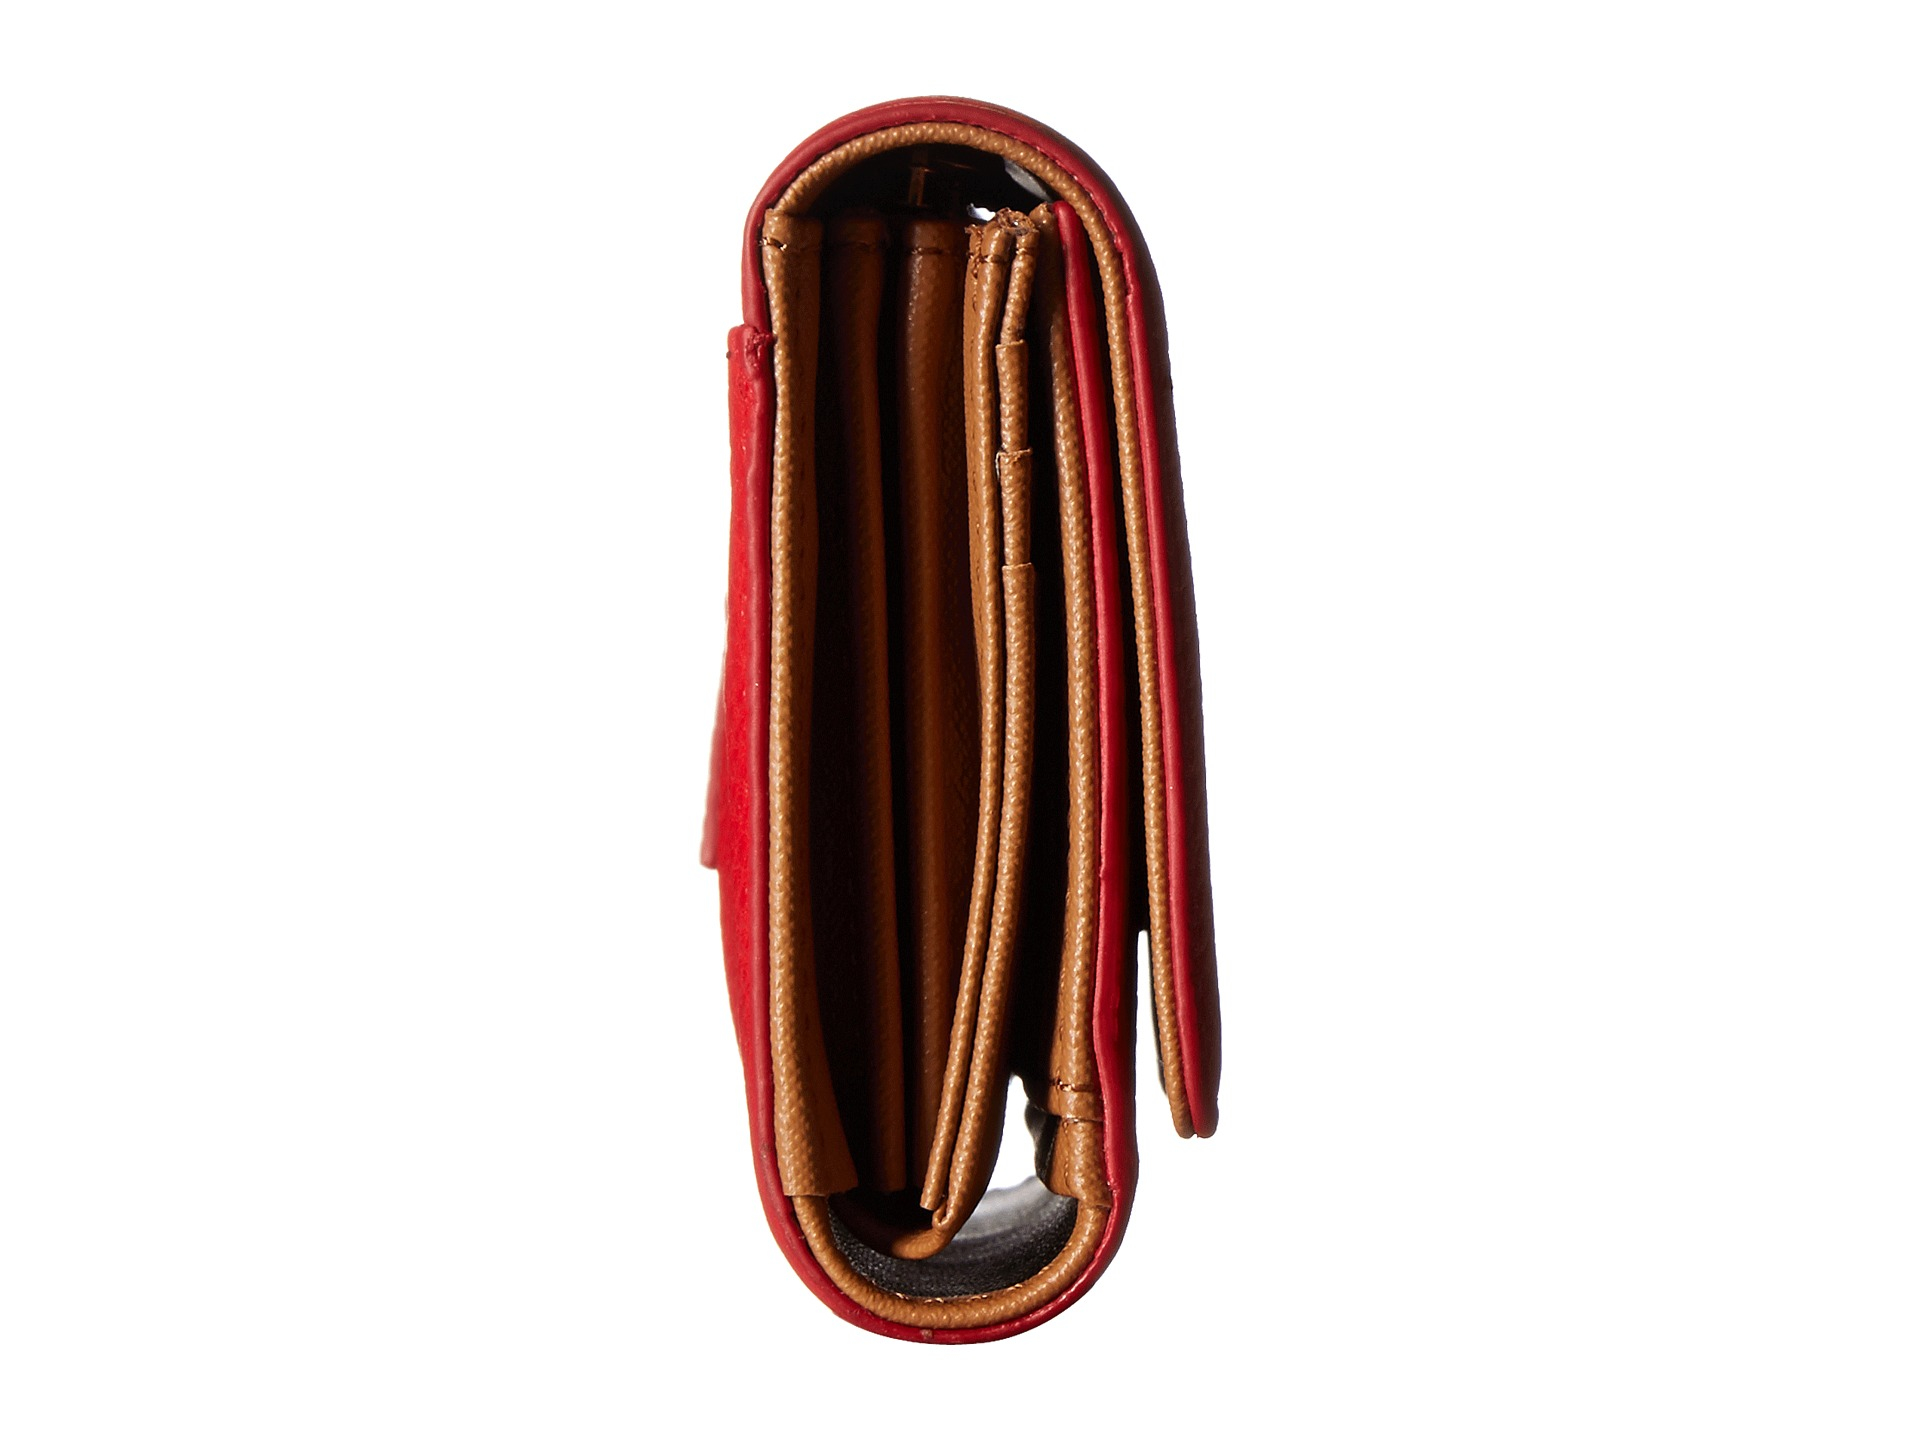 Fossil Sydney Flap Clutch in Red (Claret Red) | Lyst